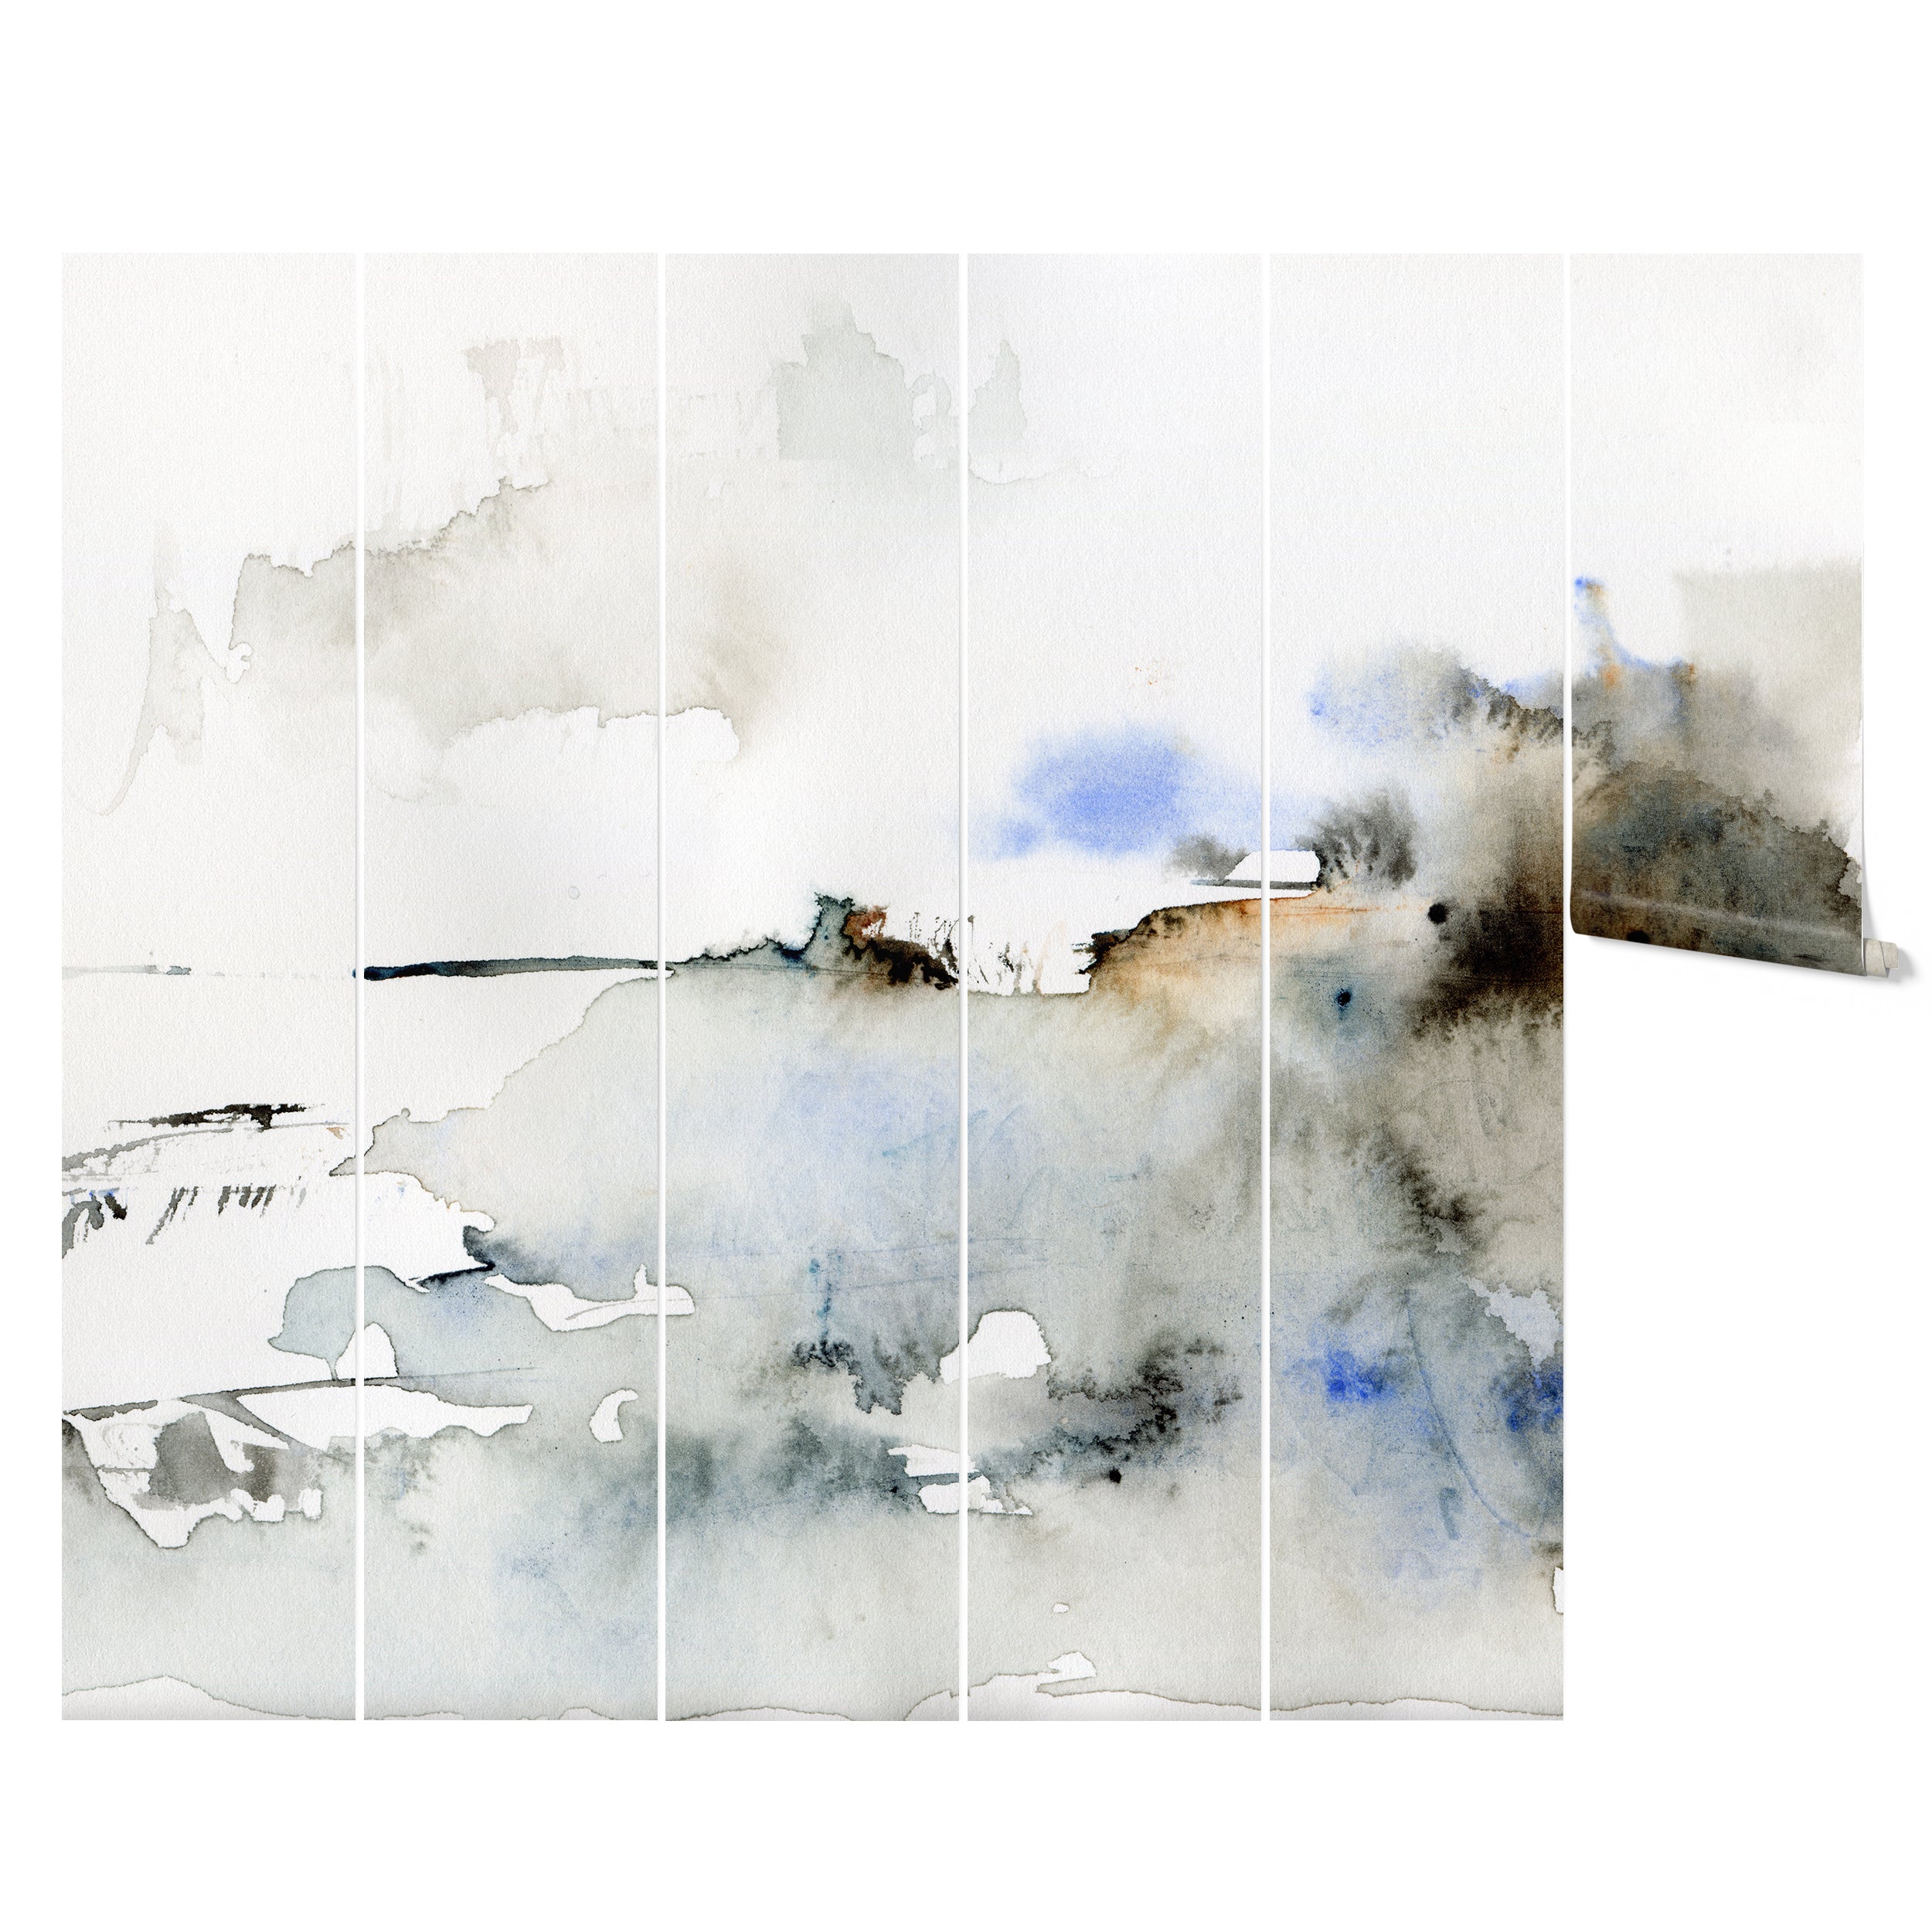 A panoramic wall mural, "Atmospheric Mural," displayed as a series of vertical panels, featuring abstract watercolor brush strokes in a blend of grays, whites, and hints of blue, creating a serene and evocative visual experience reminiscent of a stormy seascape.